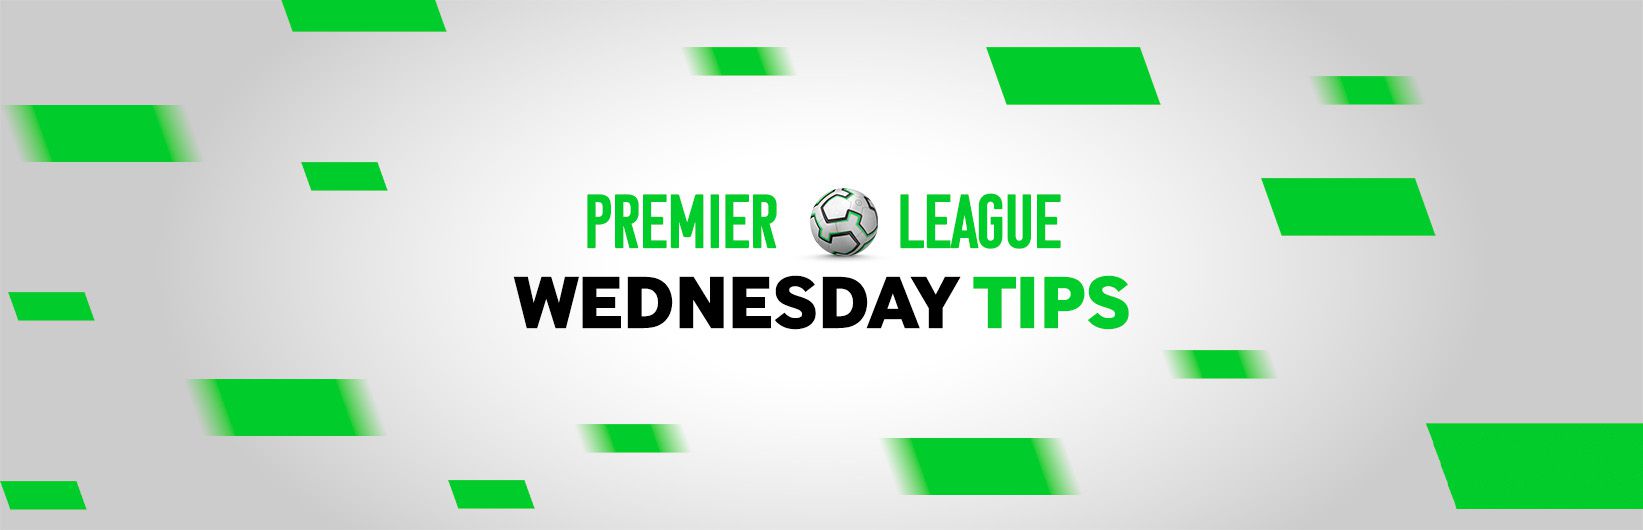 Premier League tips: Best bets for Wednesday night